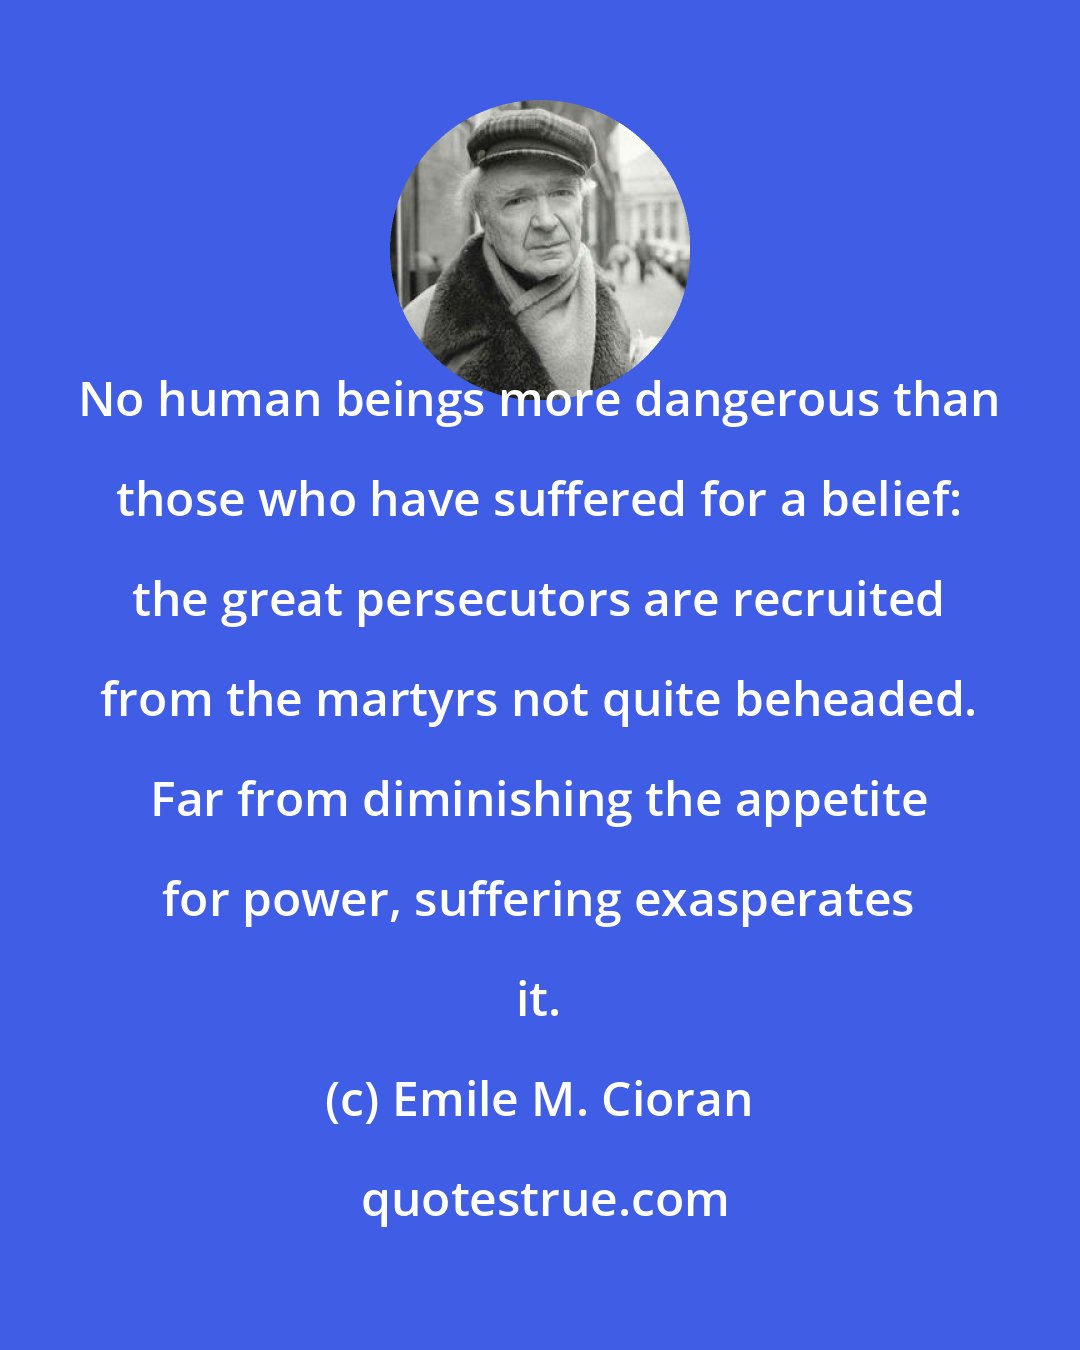 Emile M. Cioran: No human beings more dangerous than those who have suffered for a belief: the great persecutors are recruited from the martyrs not quite beheaded. Far from diminishing the appetite for power, suffering exasperates it.